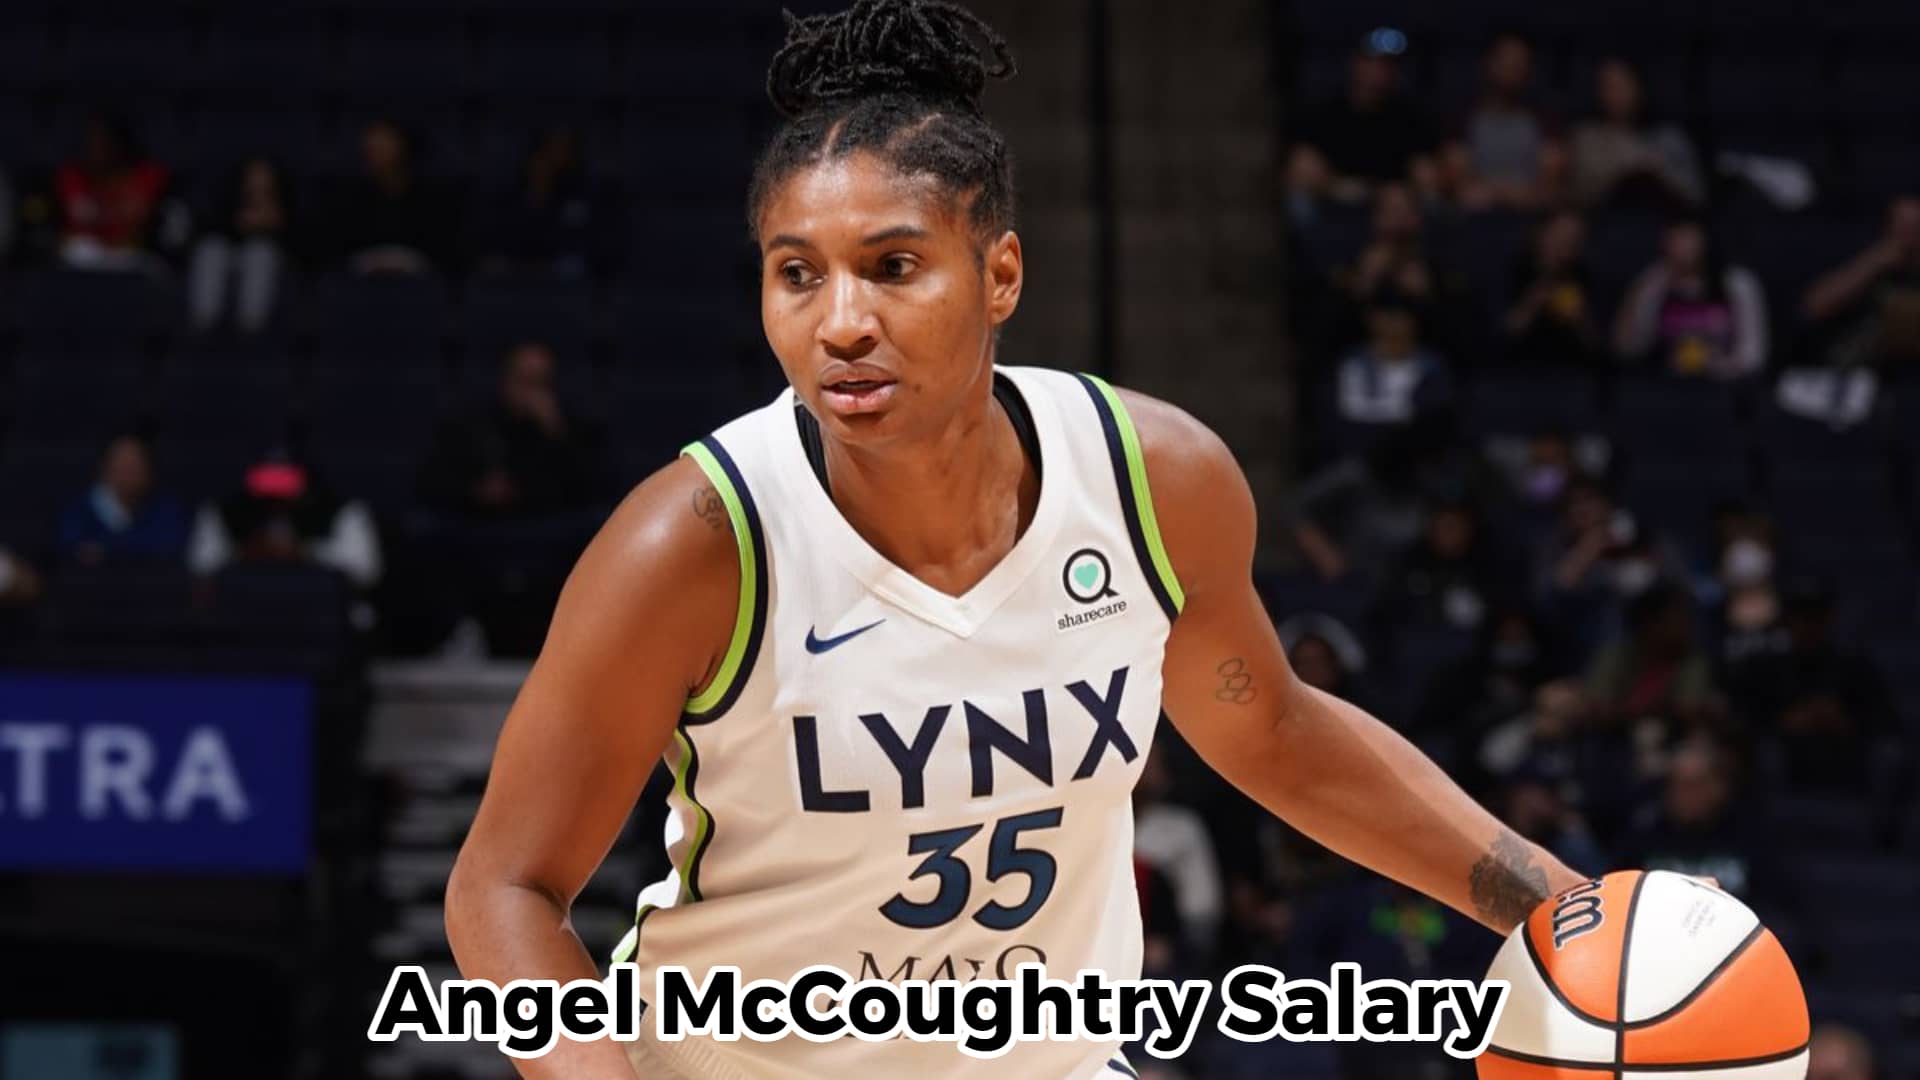 Angel McCoughtry salary